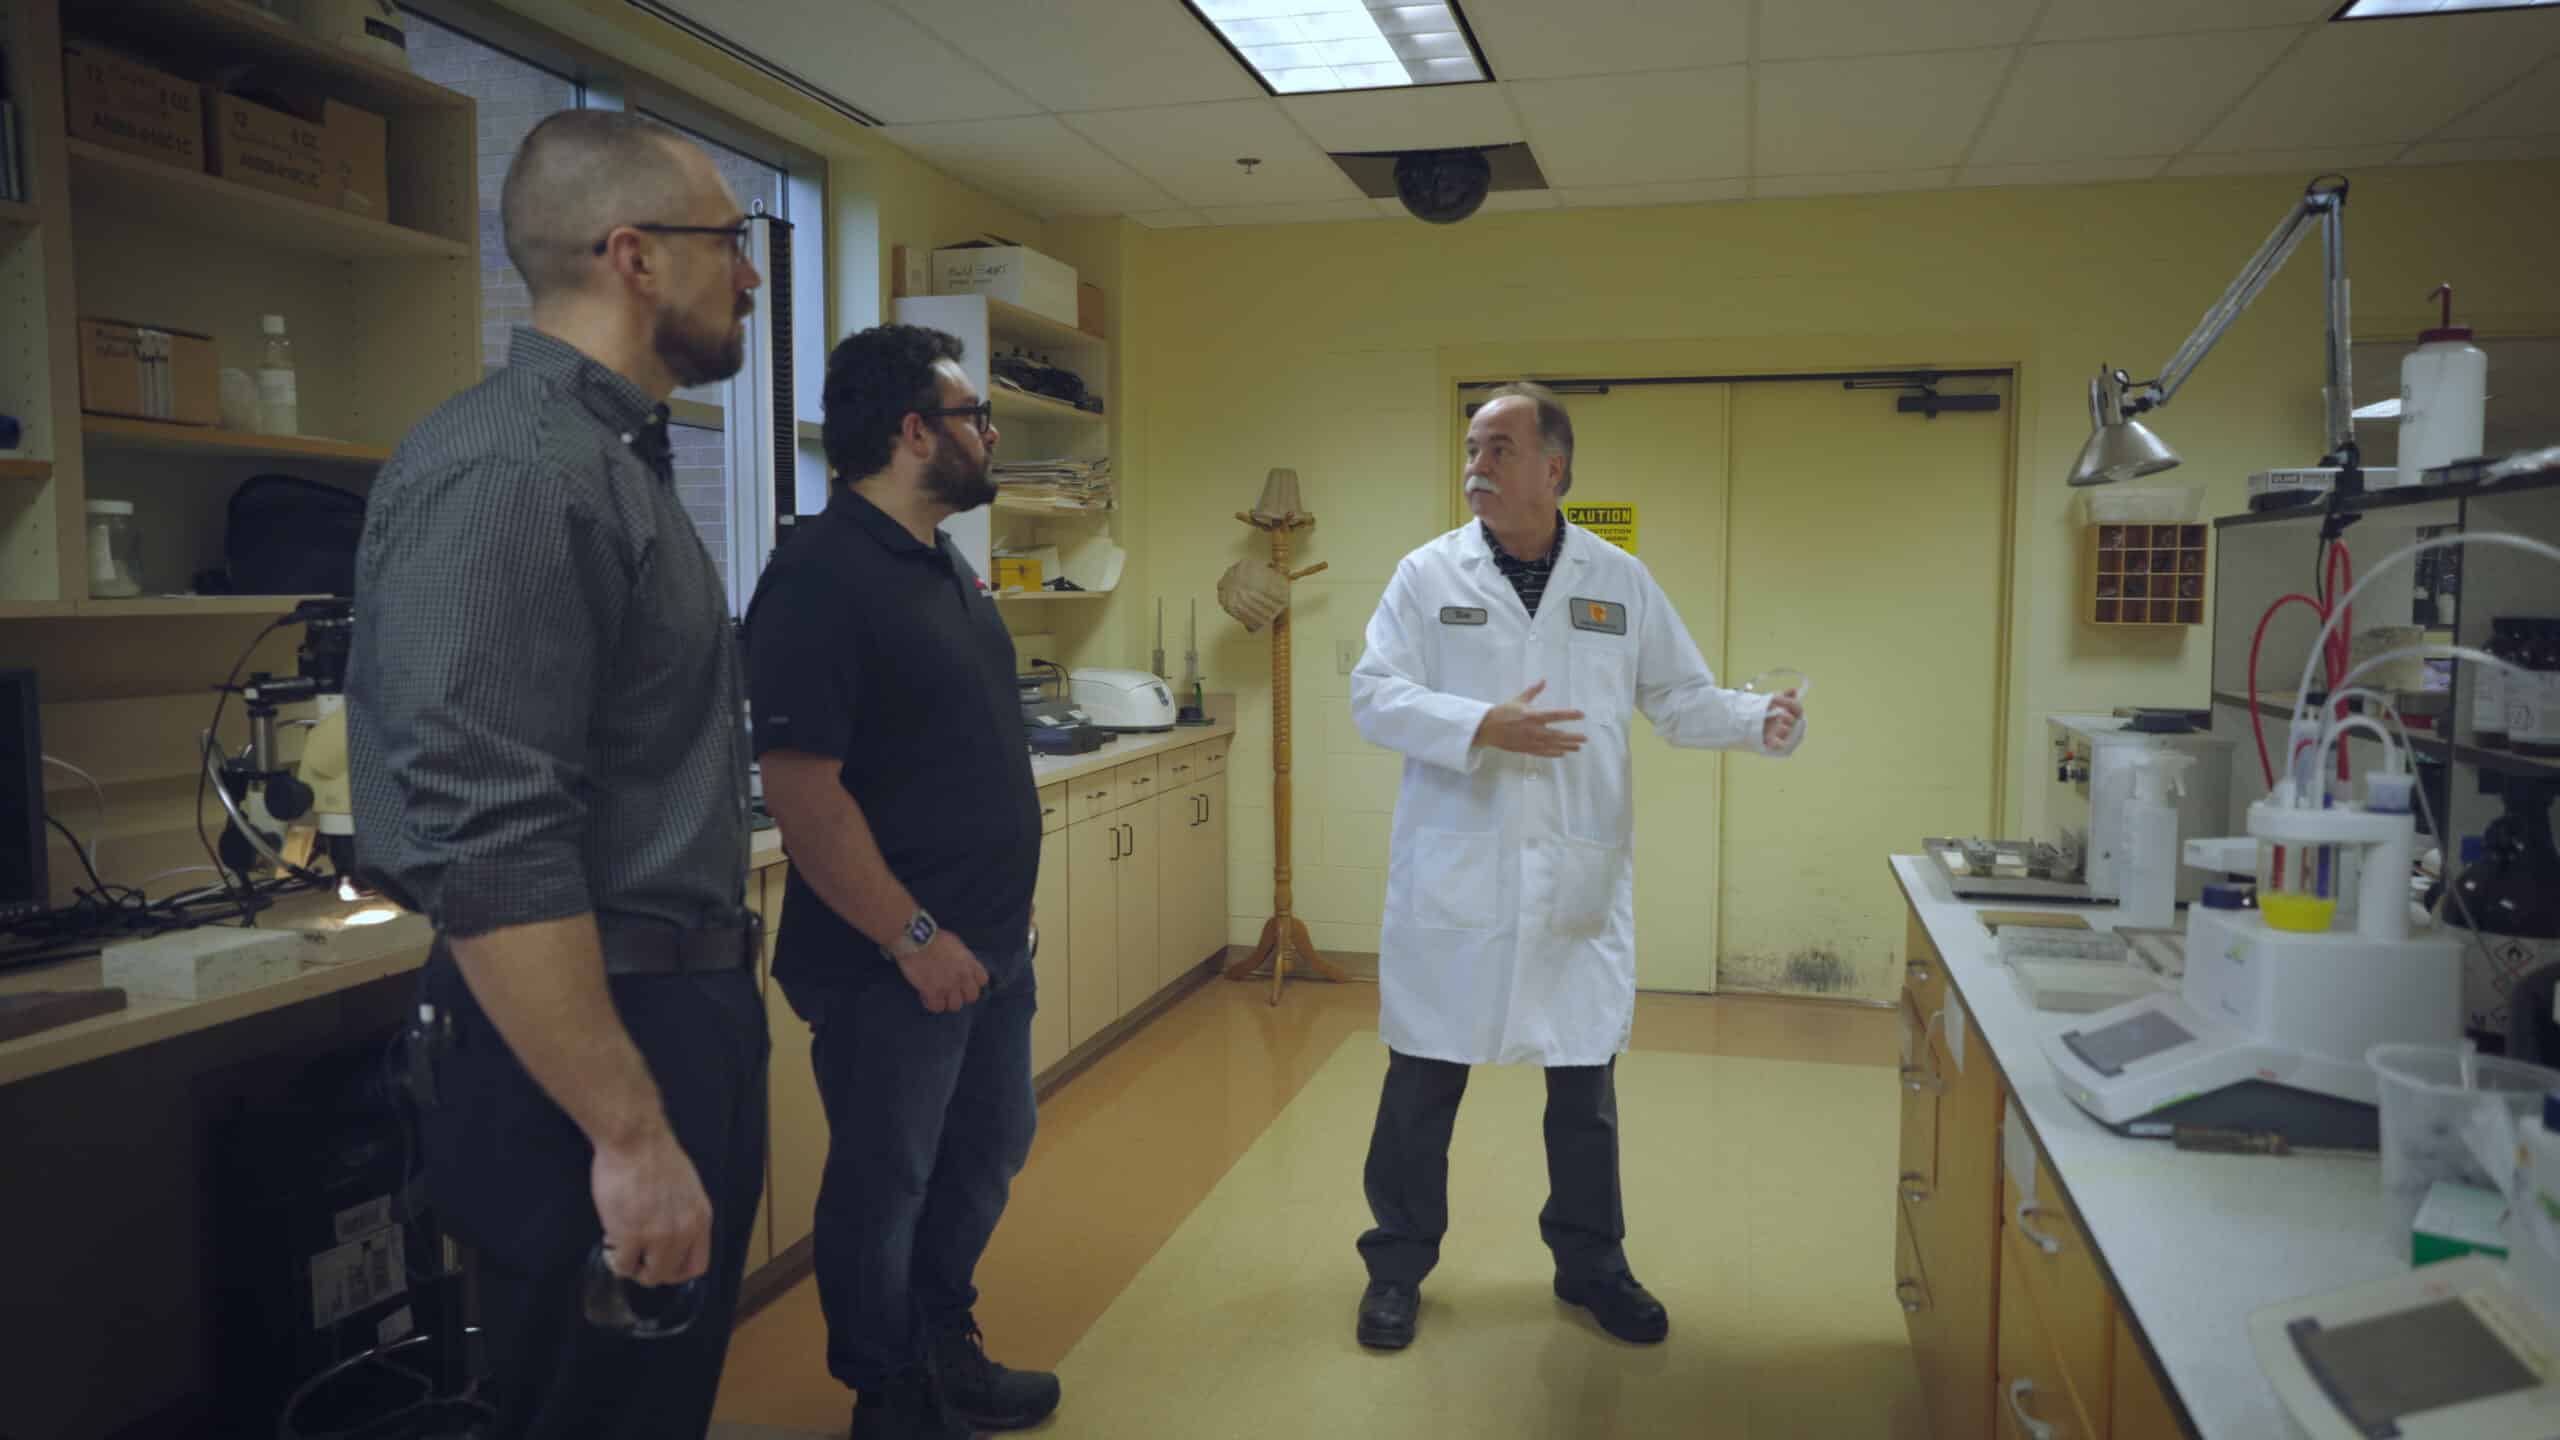 Dan Kamys got a tour of PROSOCO's laboratory from Director of R&D Tom Stalnaker. 